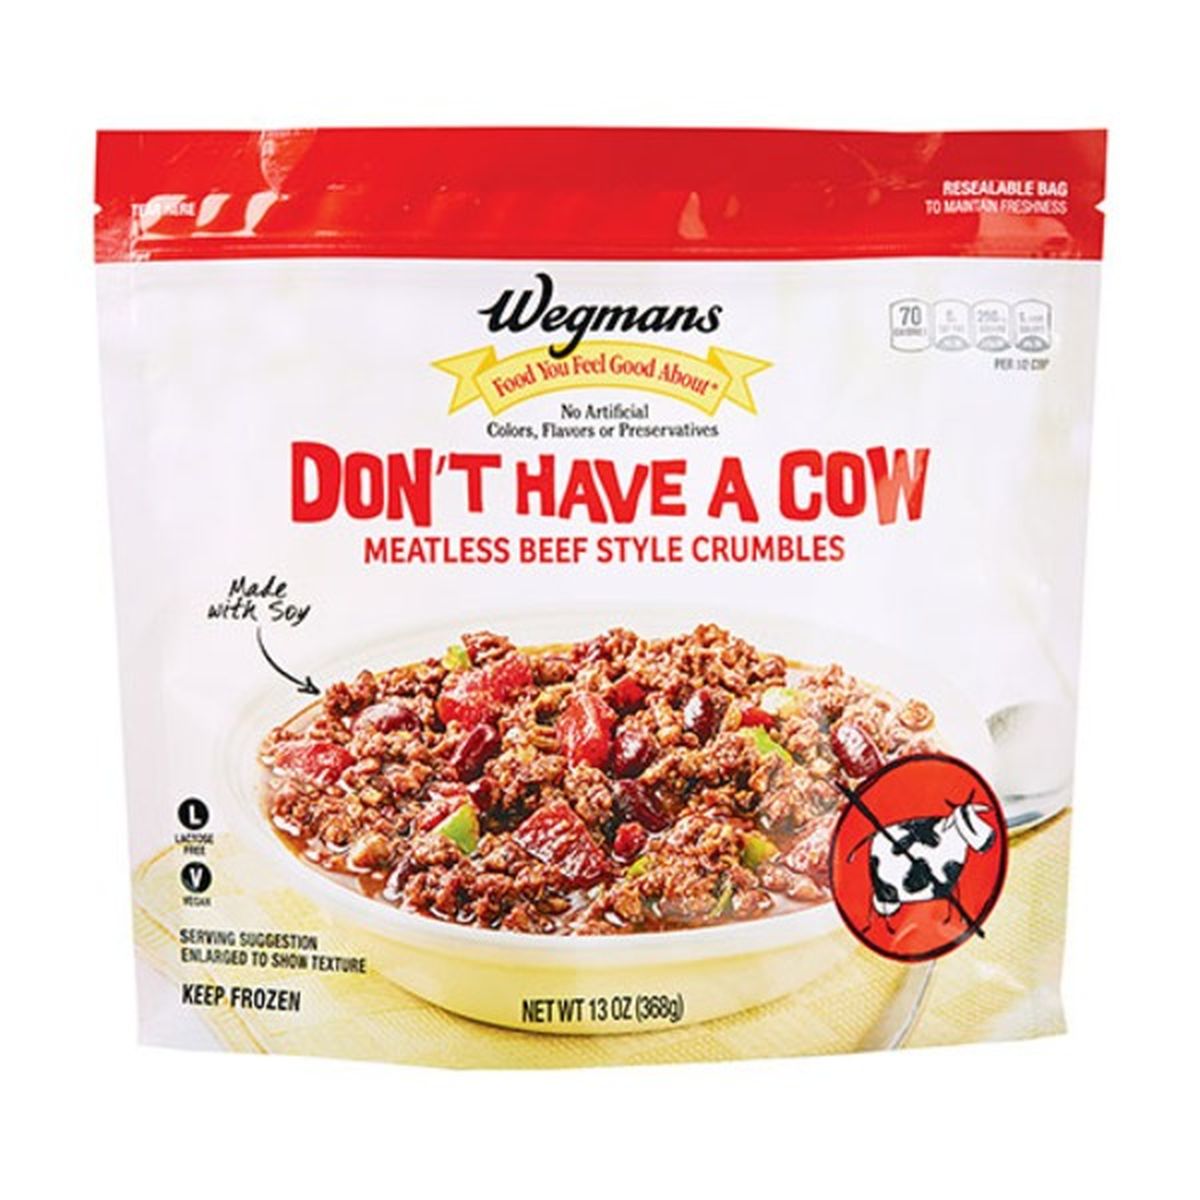 Calories in Wegmans Don't Have A Cow Meatless Beef Style Crumbles